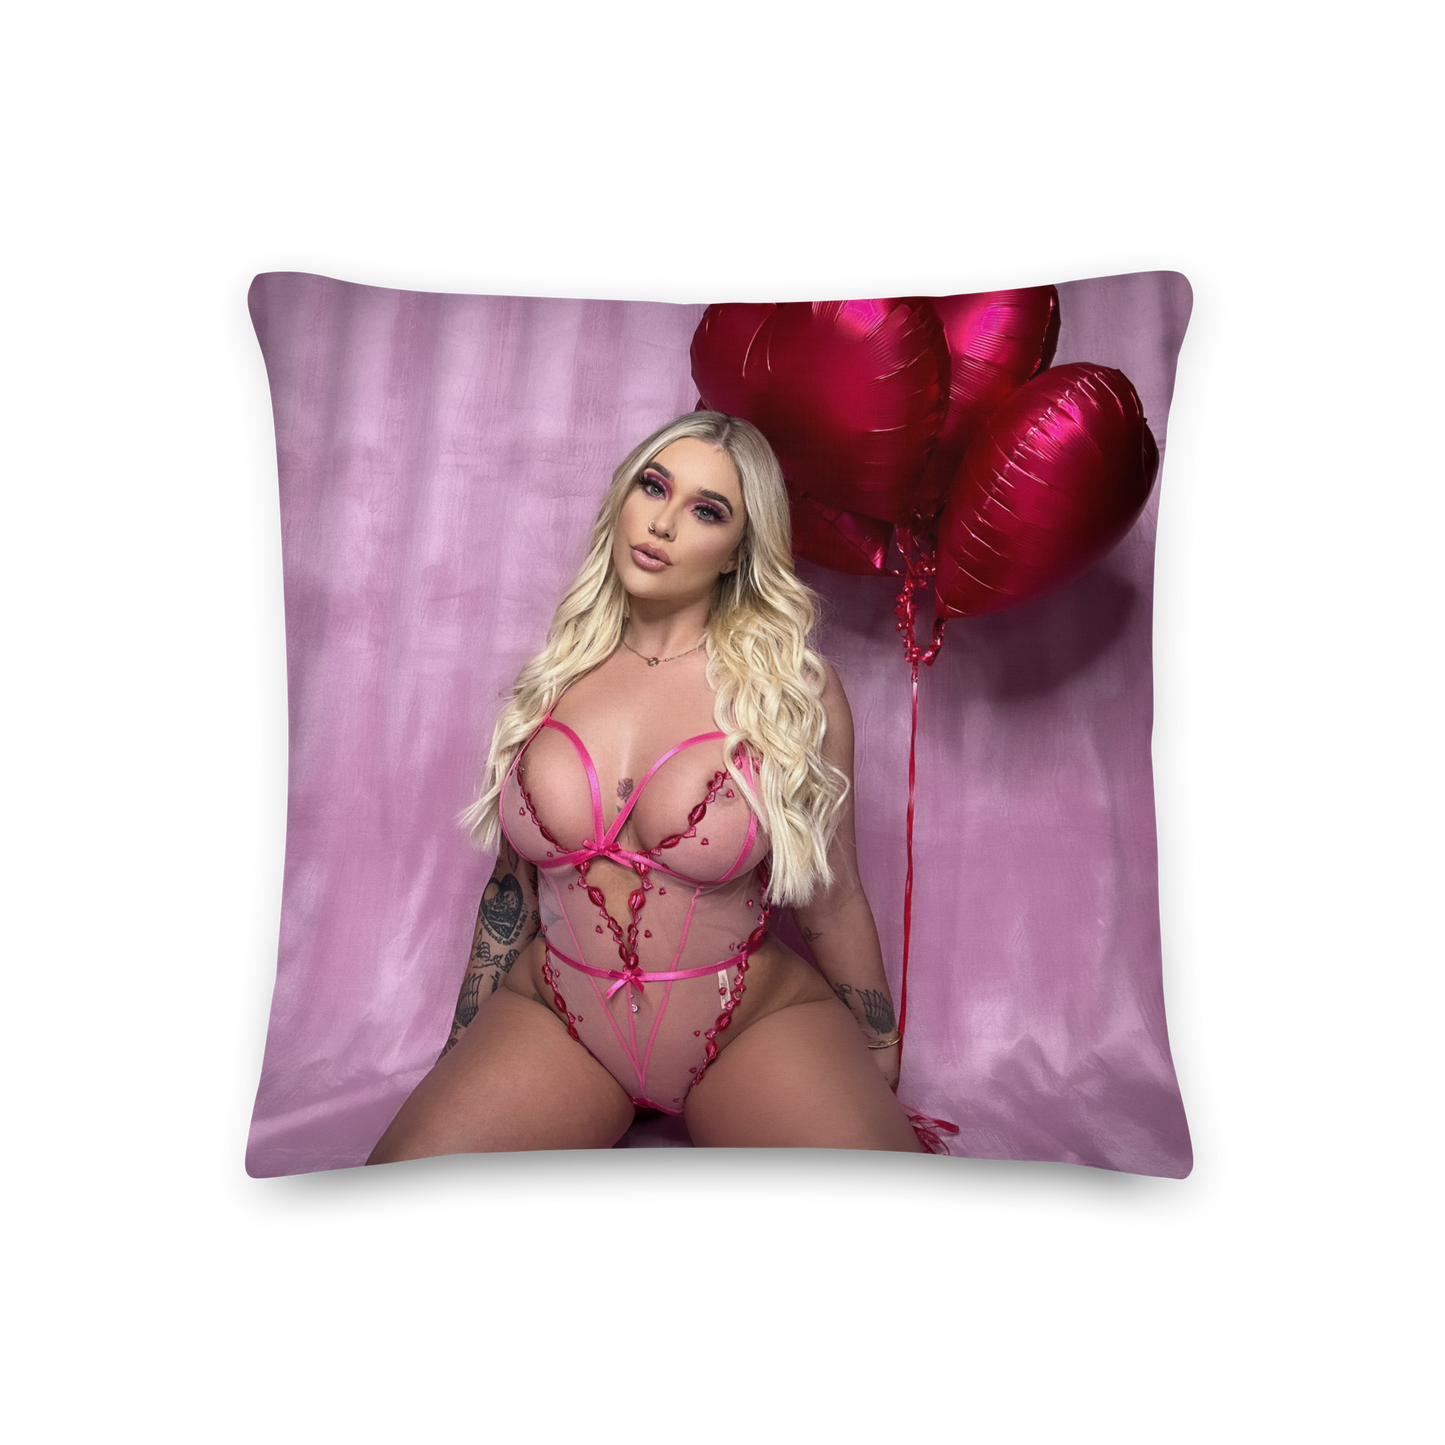 My Heart's For You Premium Pillow